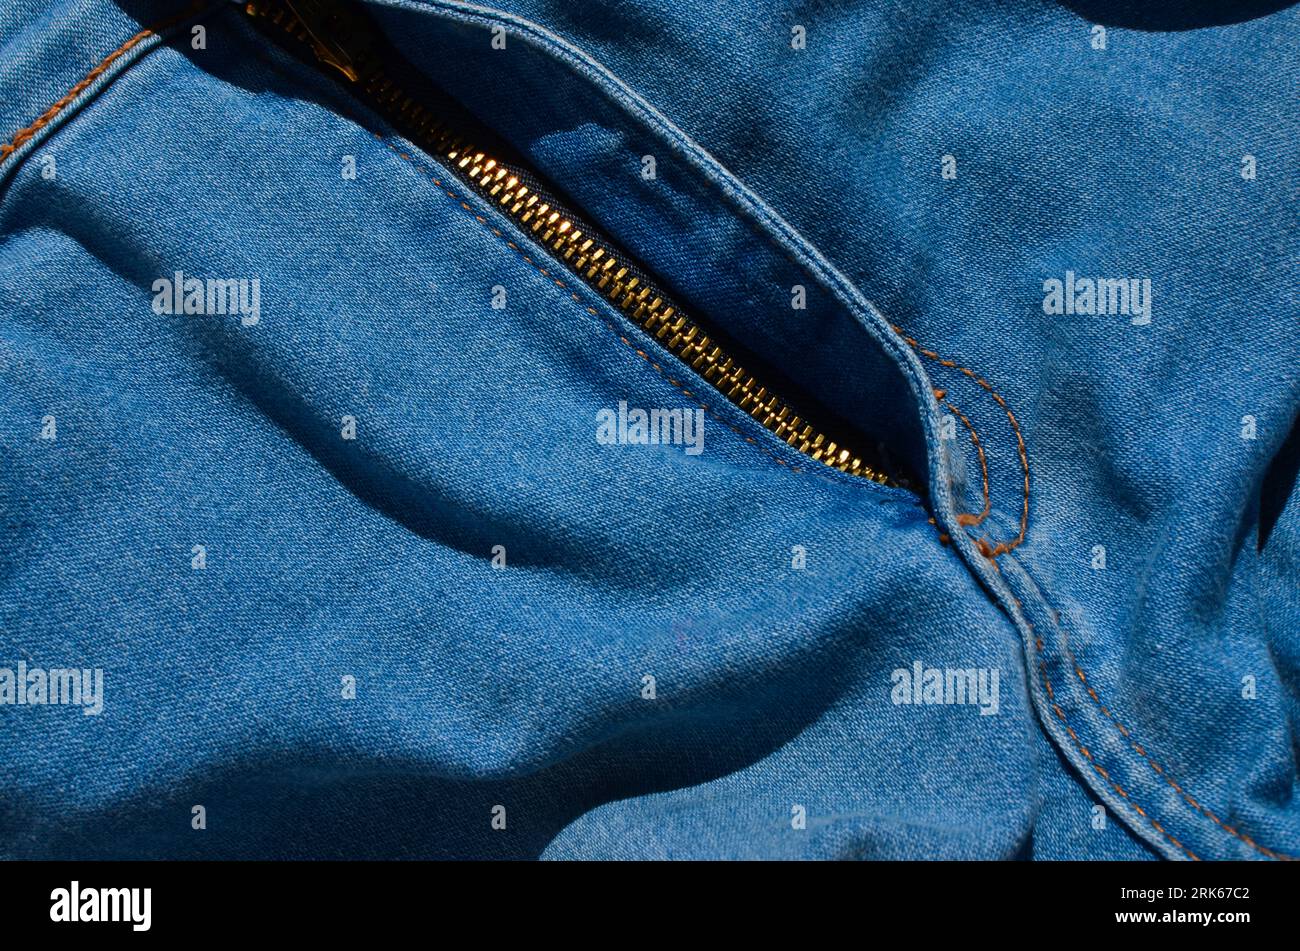 Close-up of a jeans seam, highlighting the perfectly aligned lines that guarantee an impeccable fit. Perfect for fashion and apparel projects. Stock Photo